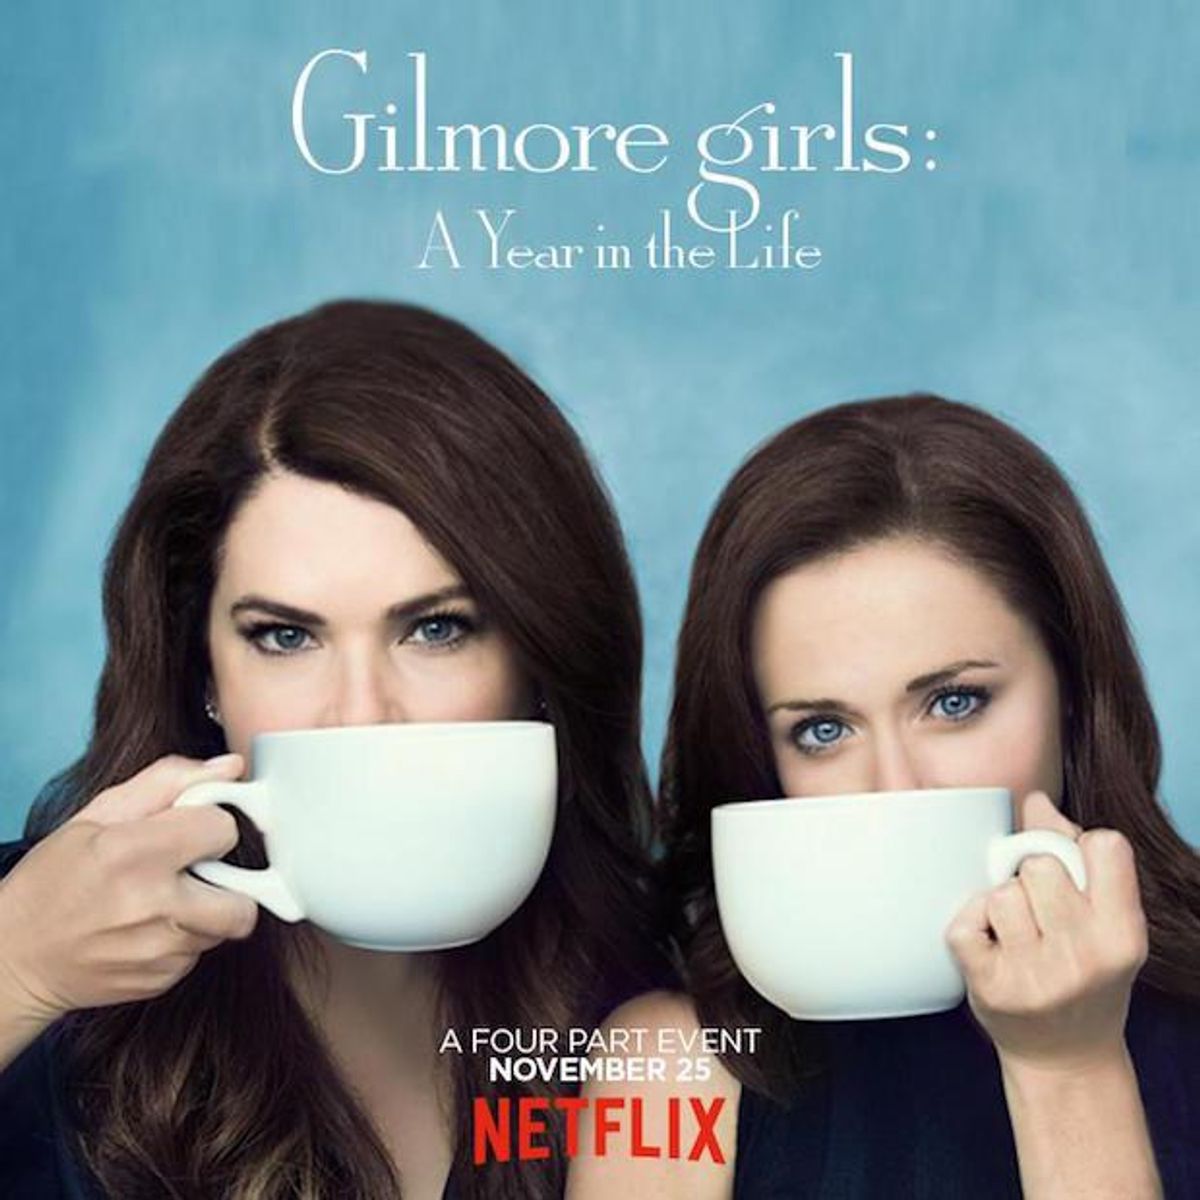 27 Thoughts You May Have While Watching Gilmore Girls: A Year In The Life